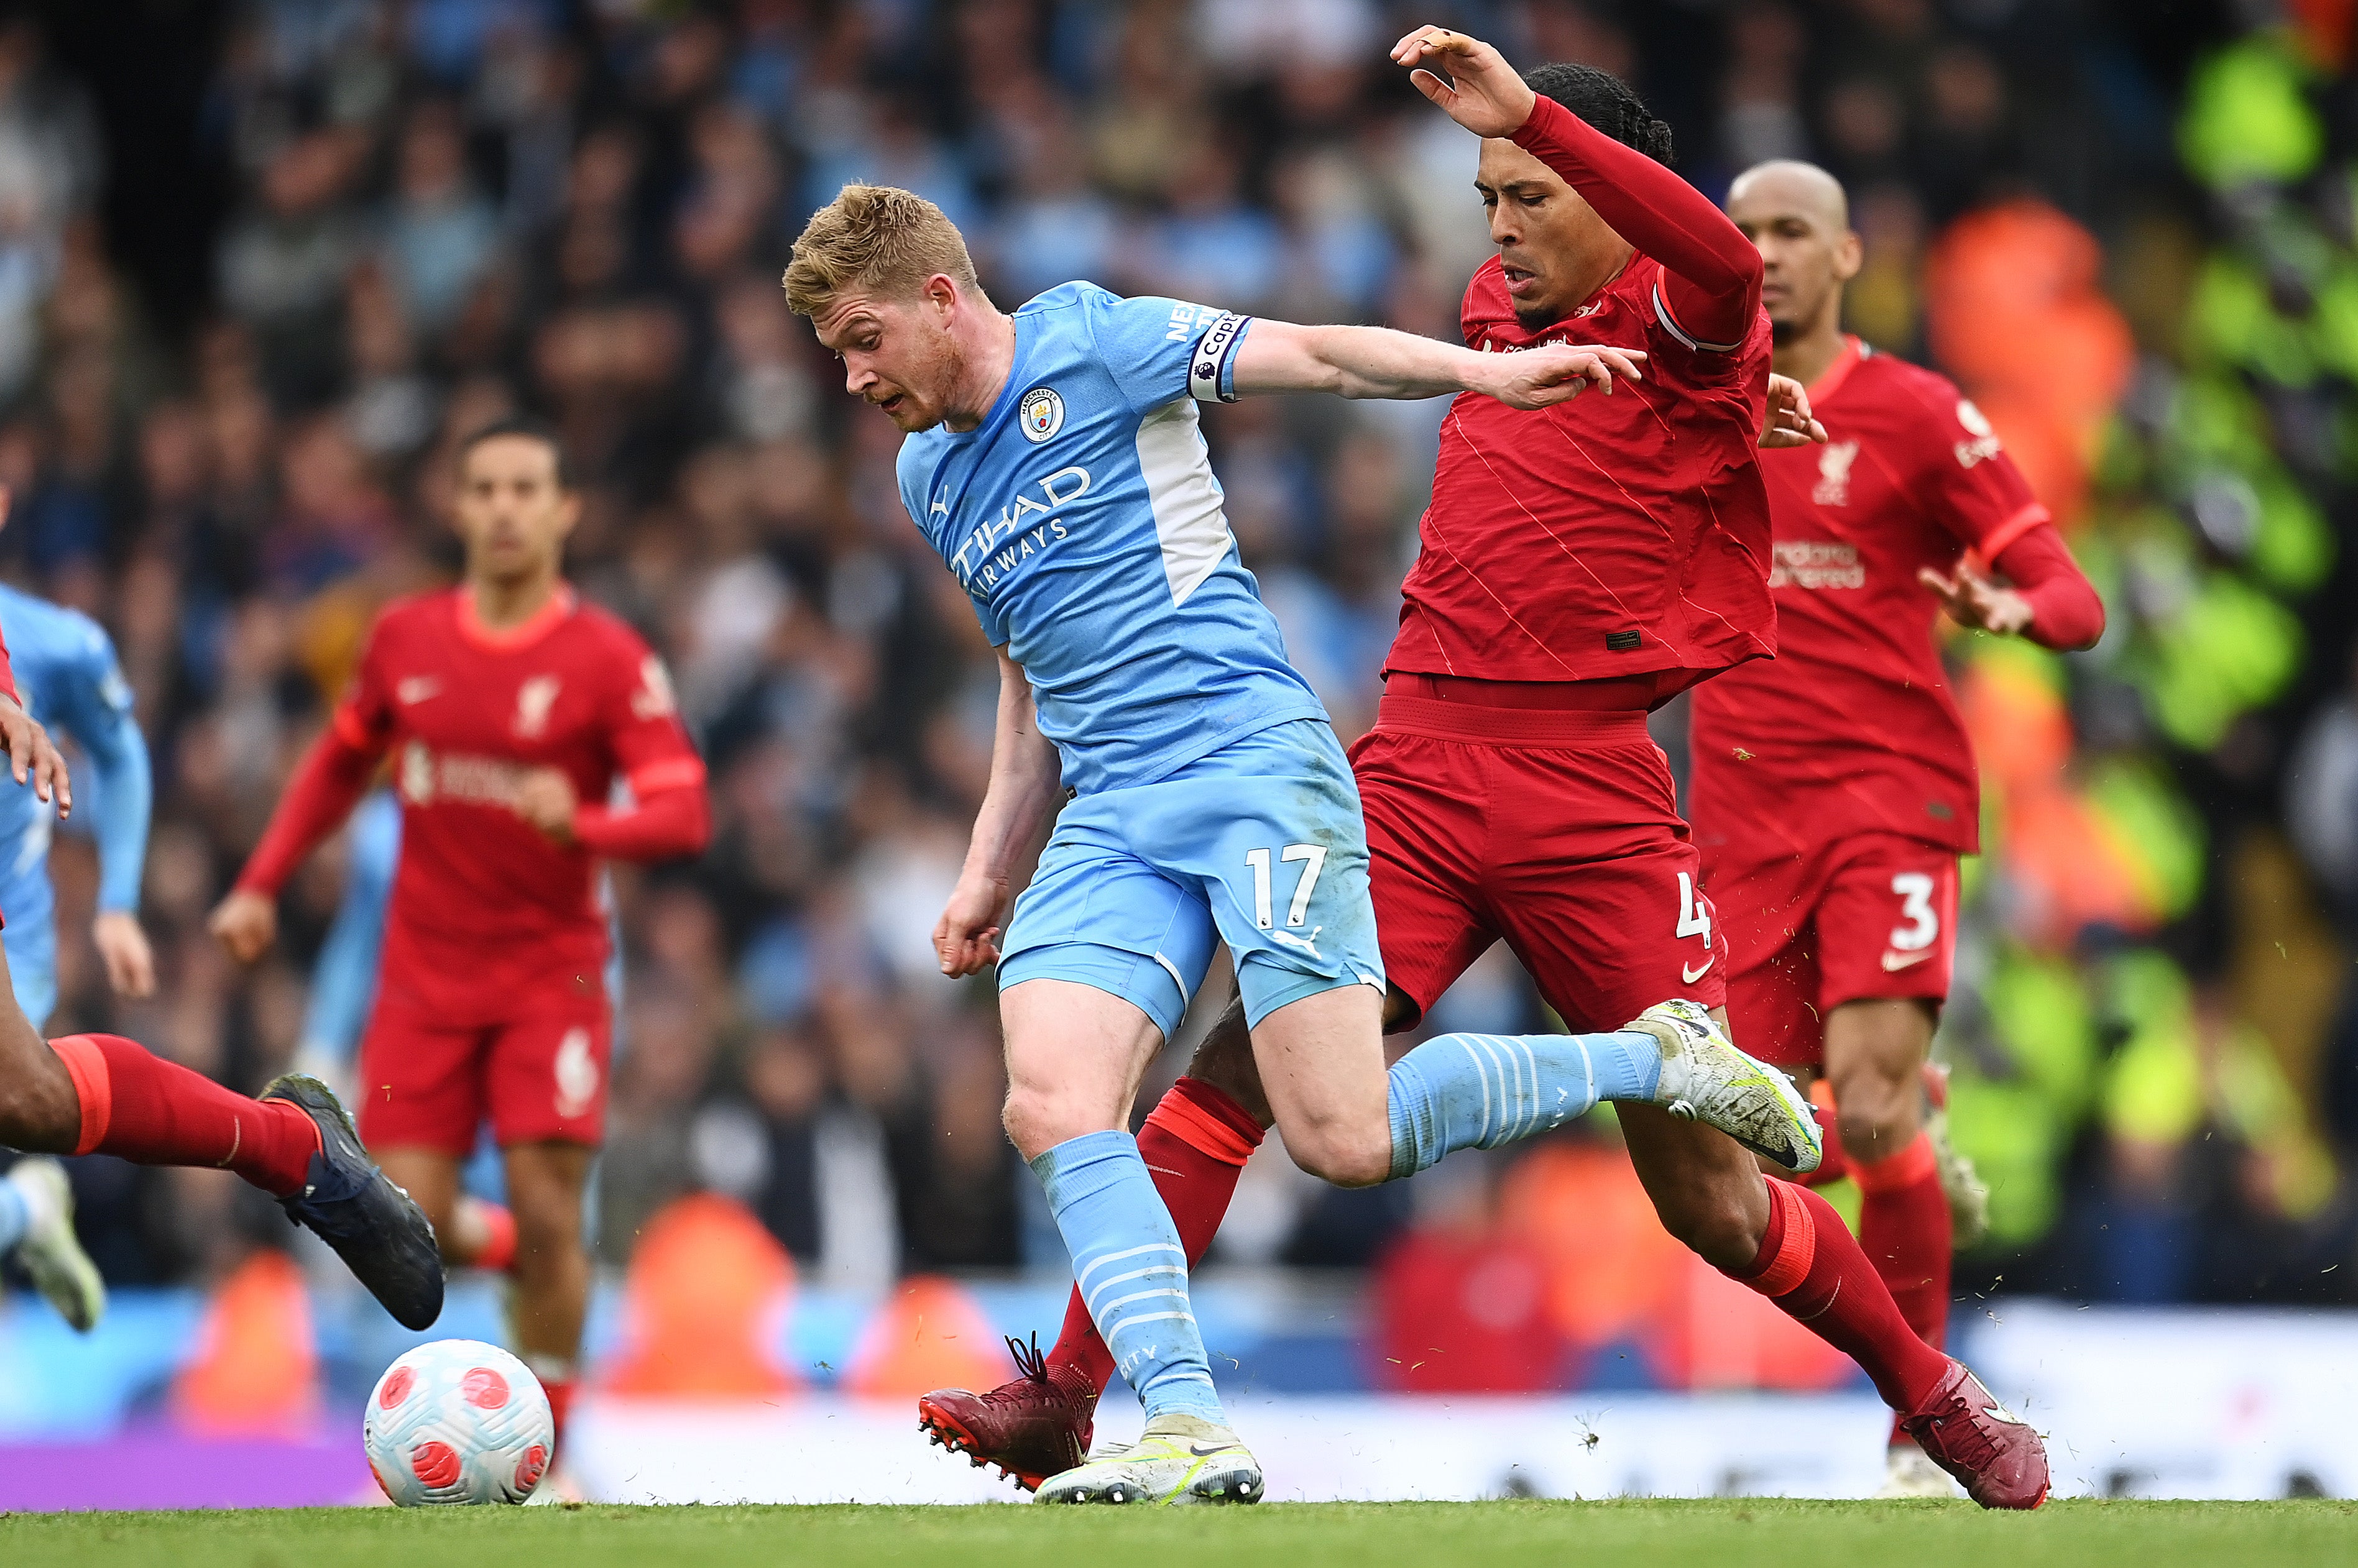 Kevin De Bruyne is set to miss today’s FA Cup semi-final after a bruising week